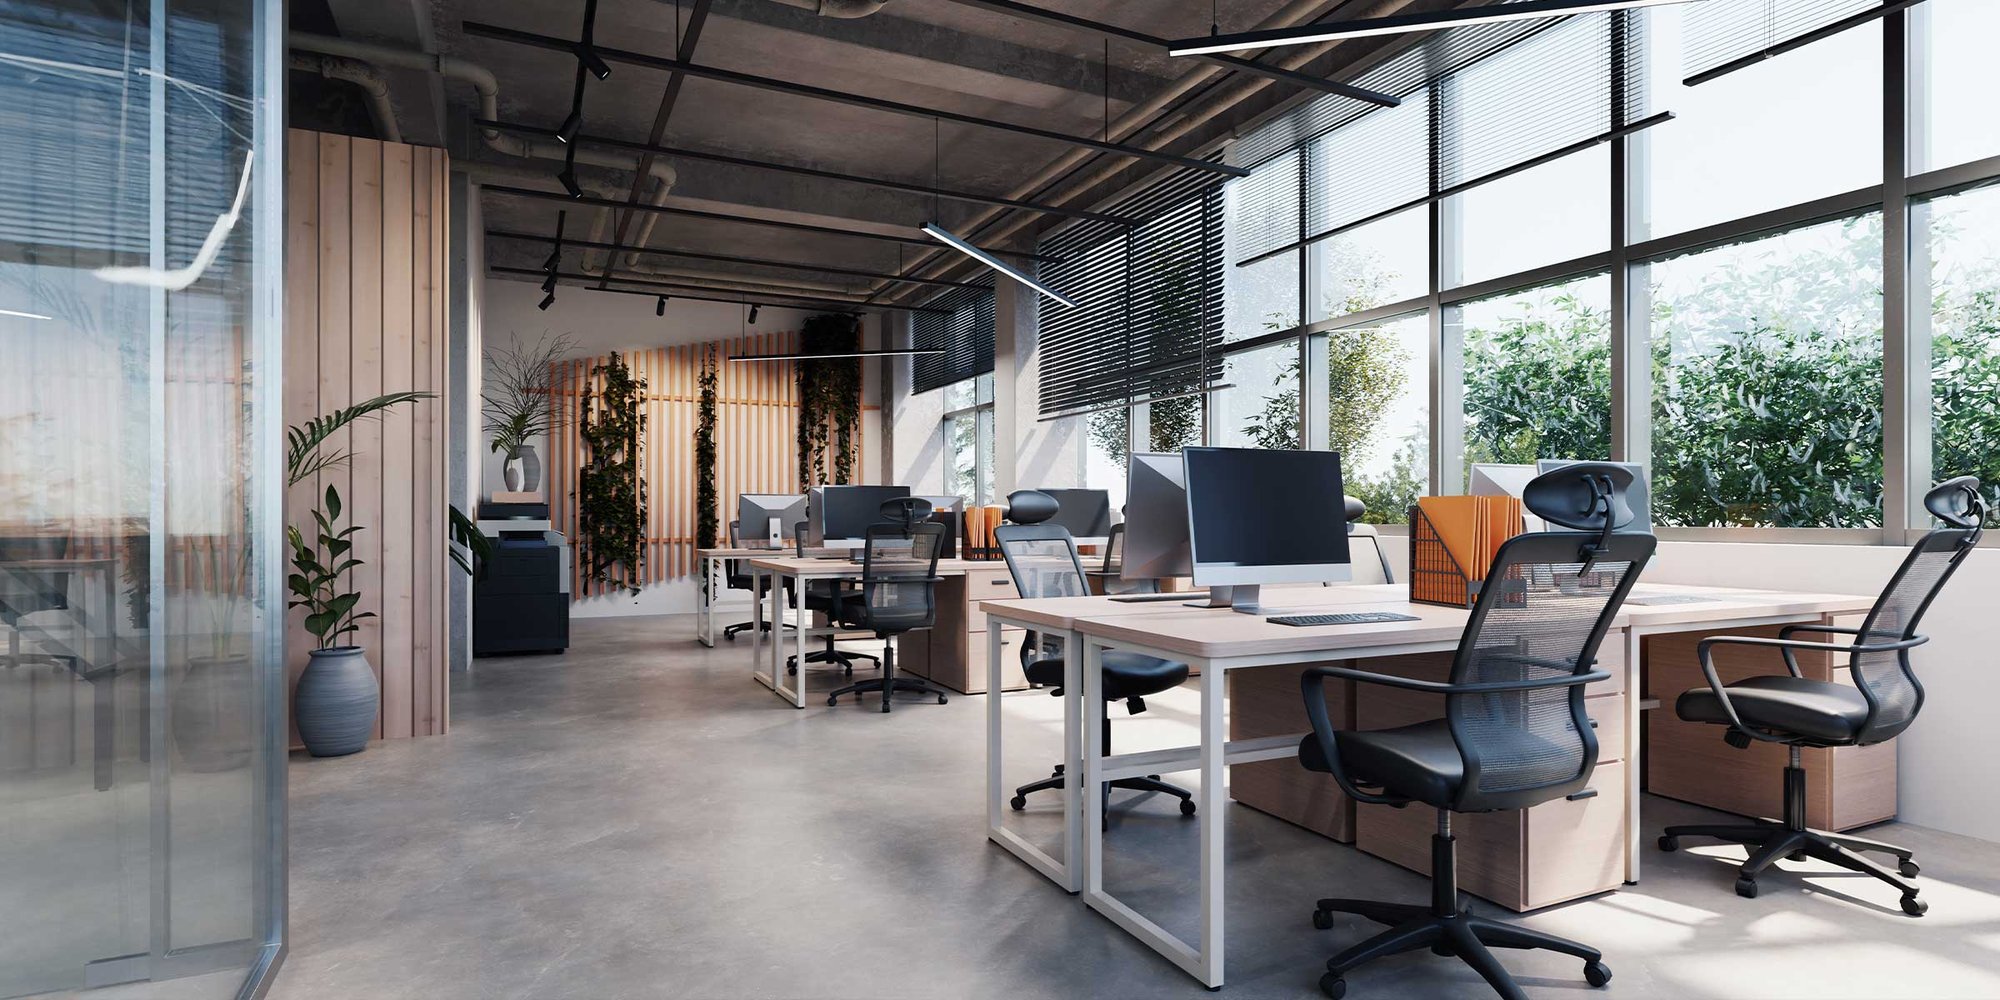 Fully utilize your office space | Hybrid work place solution | FLX